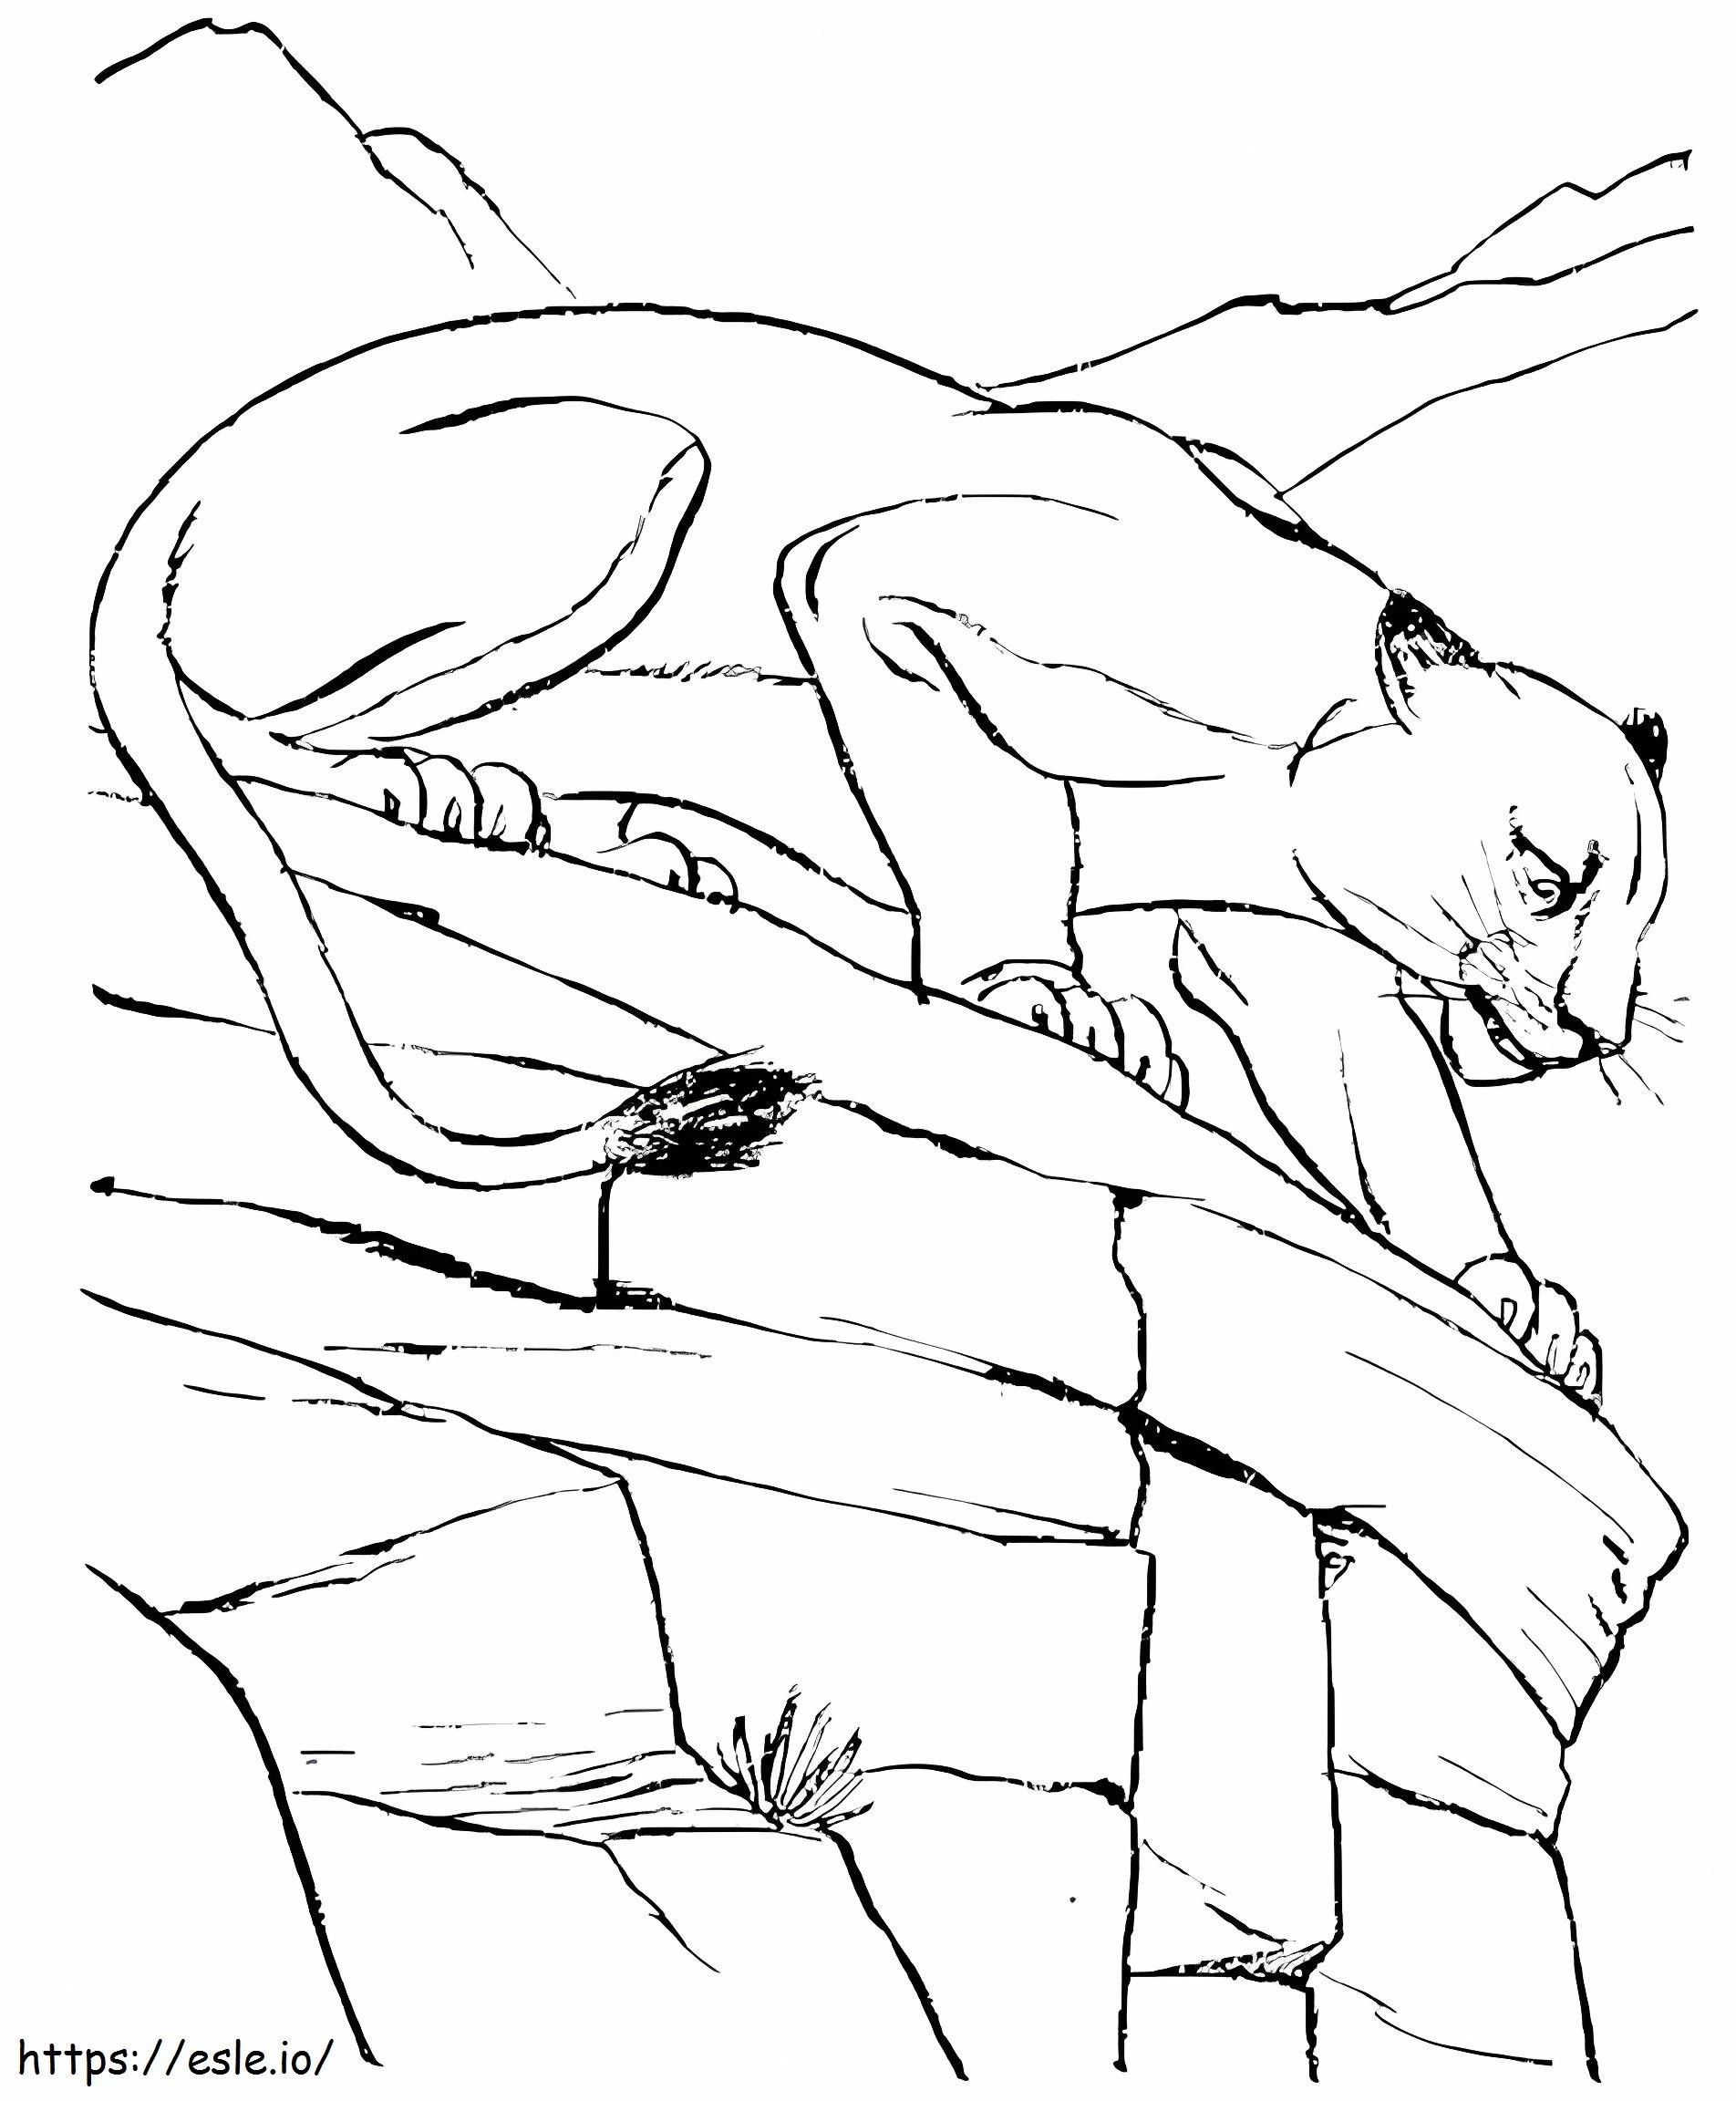 Puma Cool coloring page